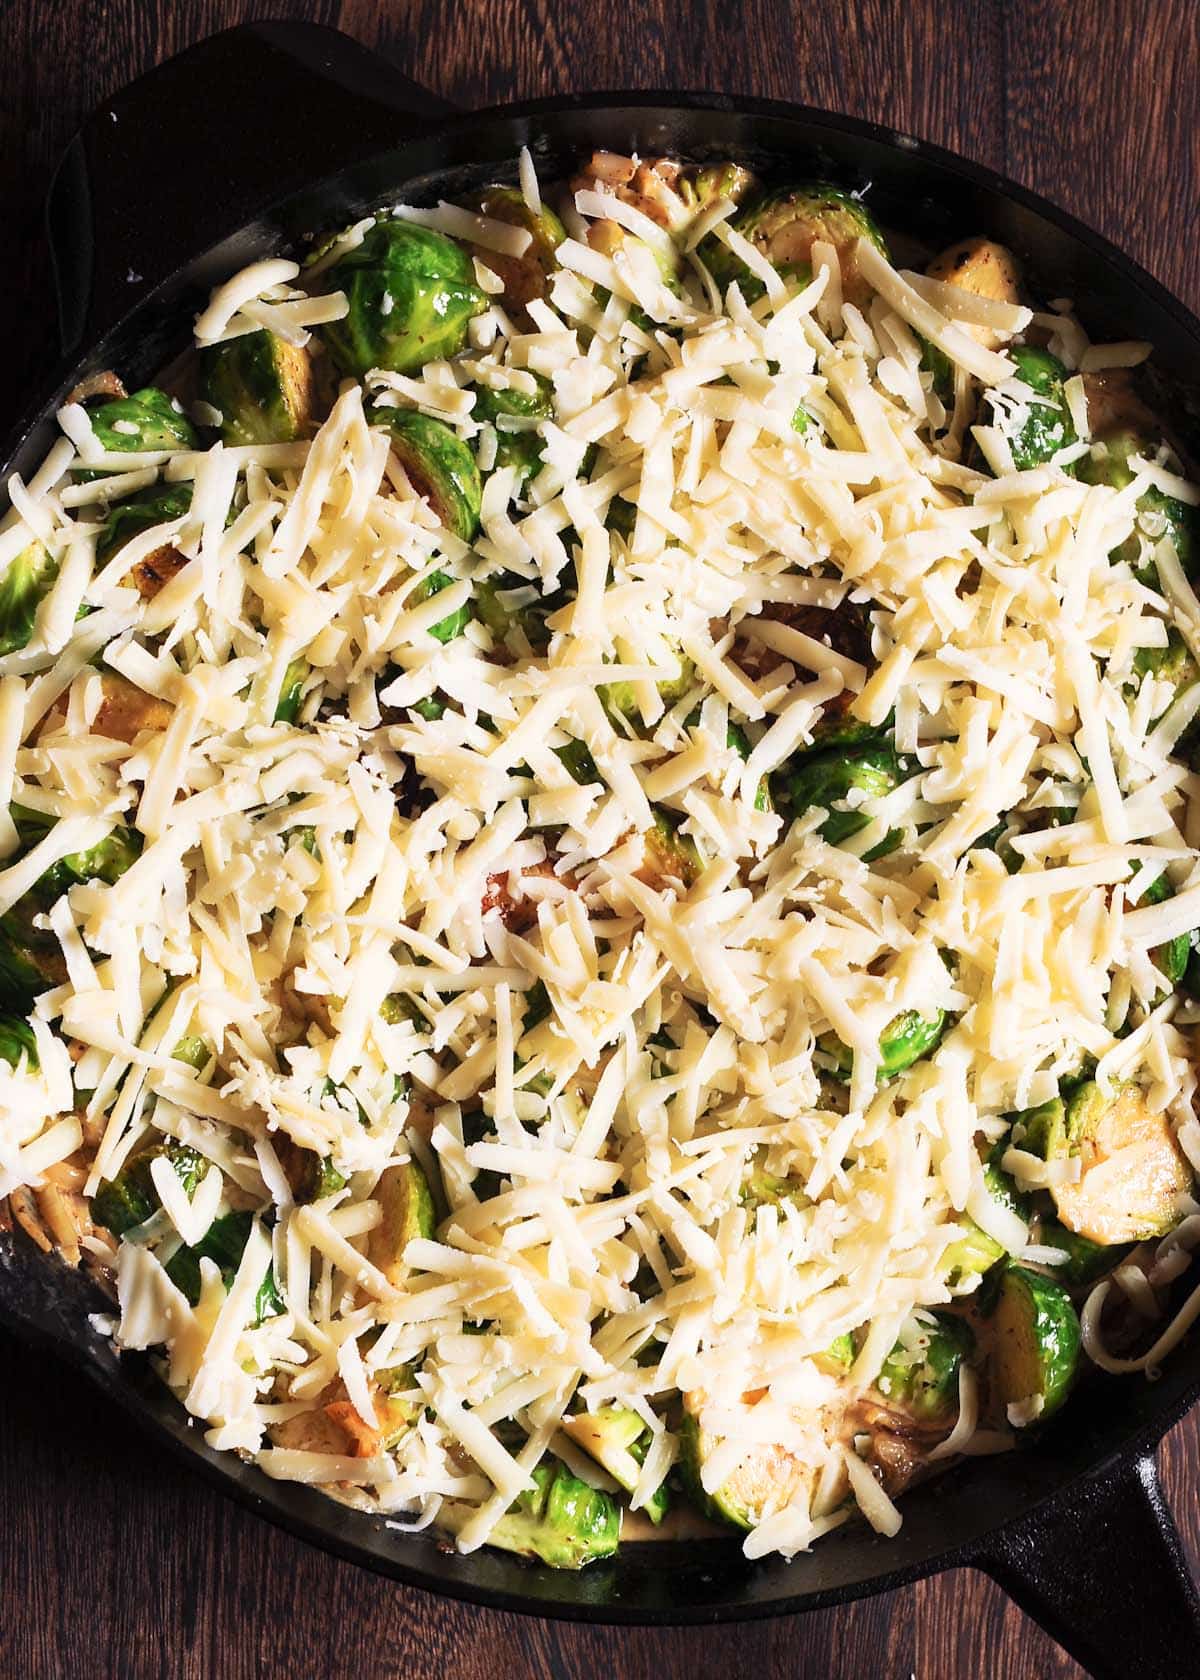 Brussels sprouts covered with cheese